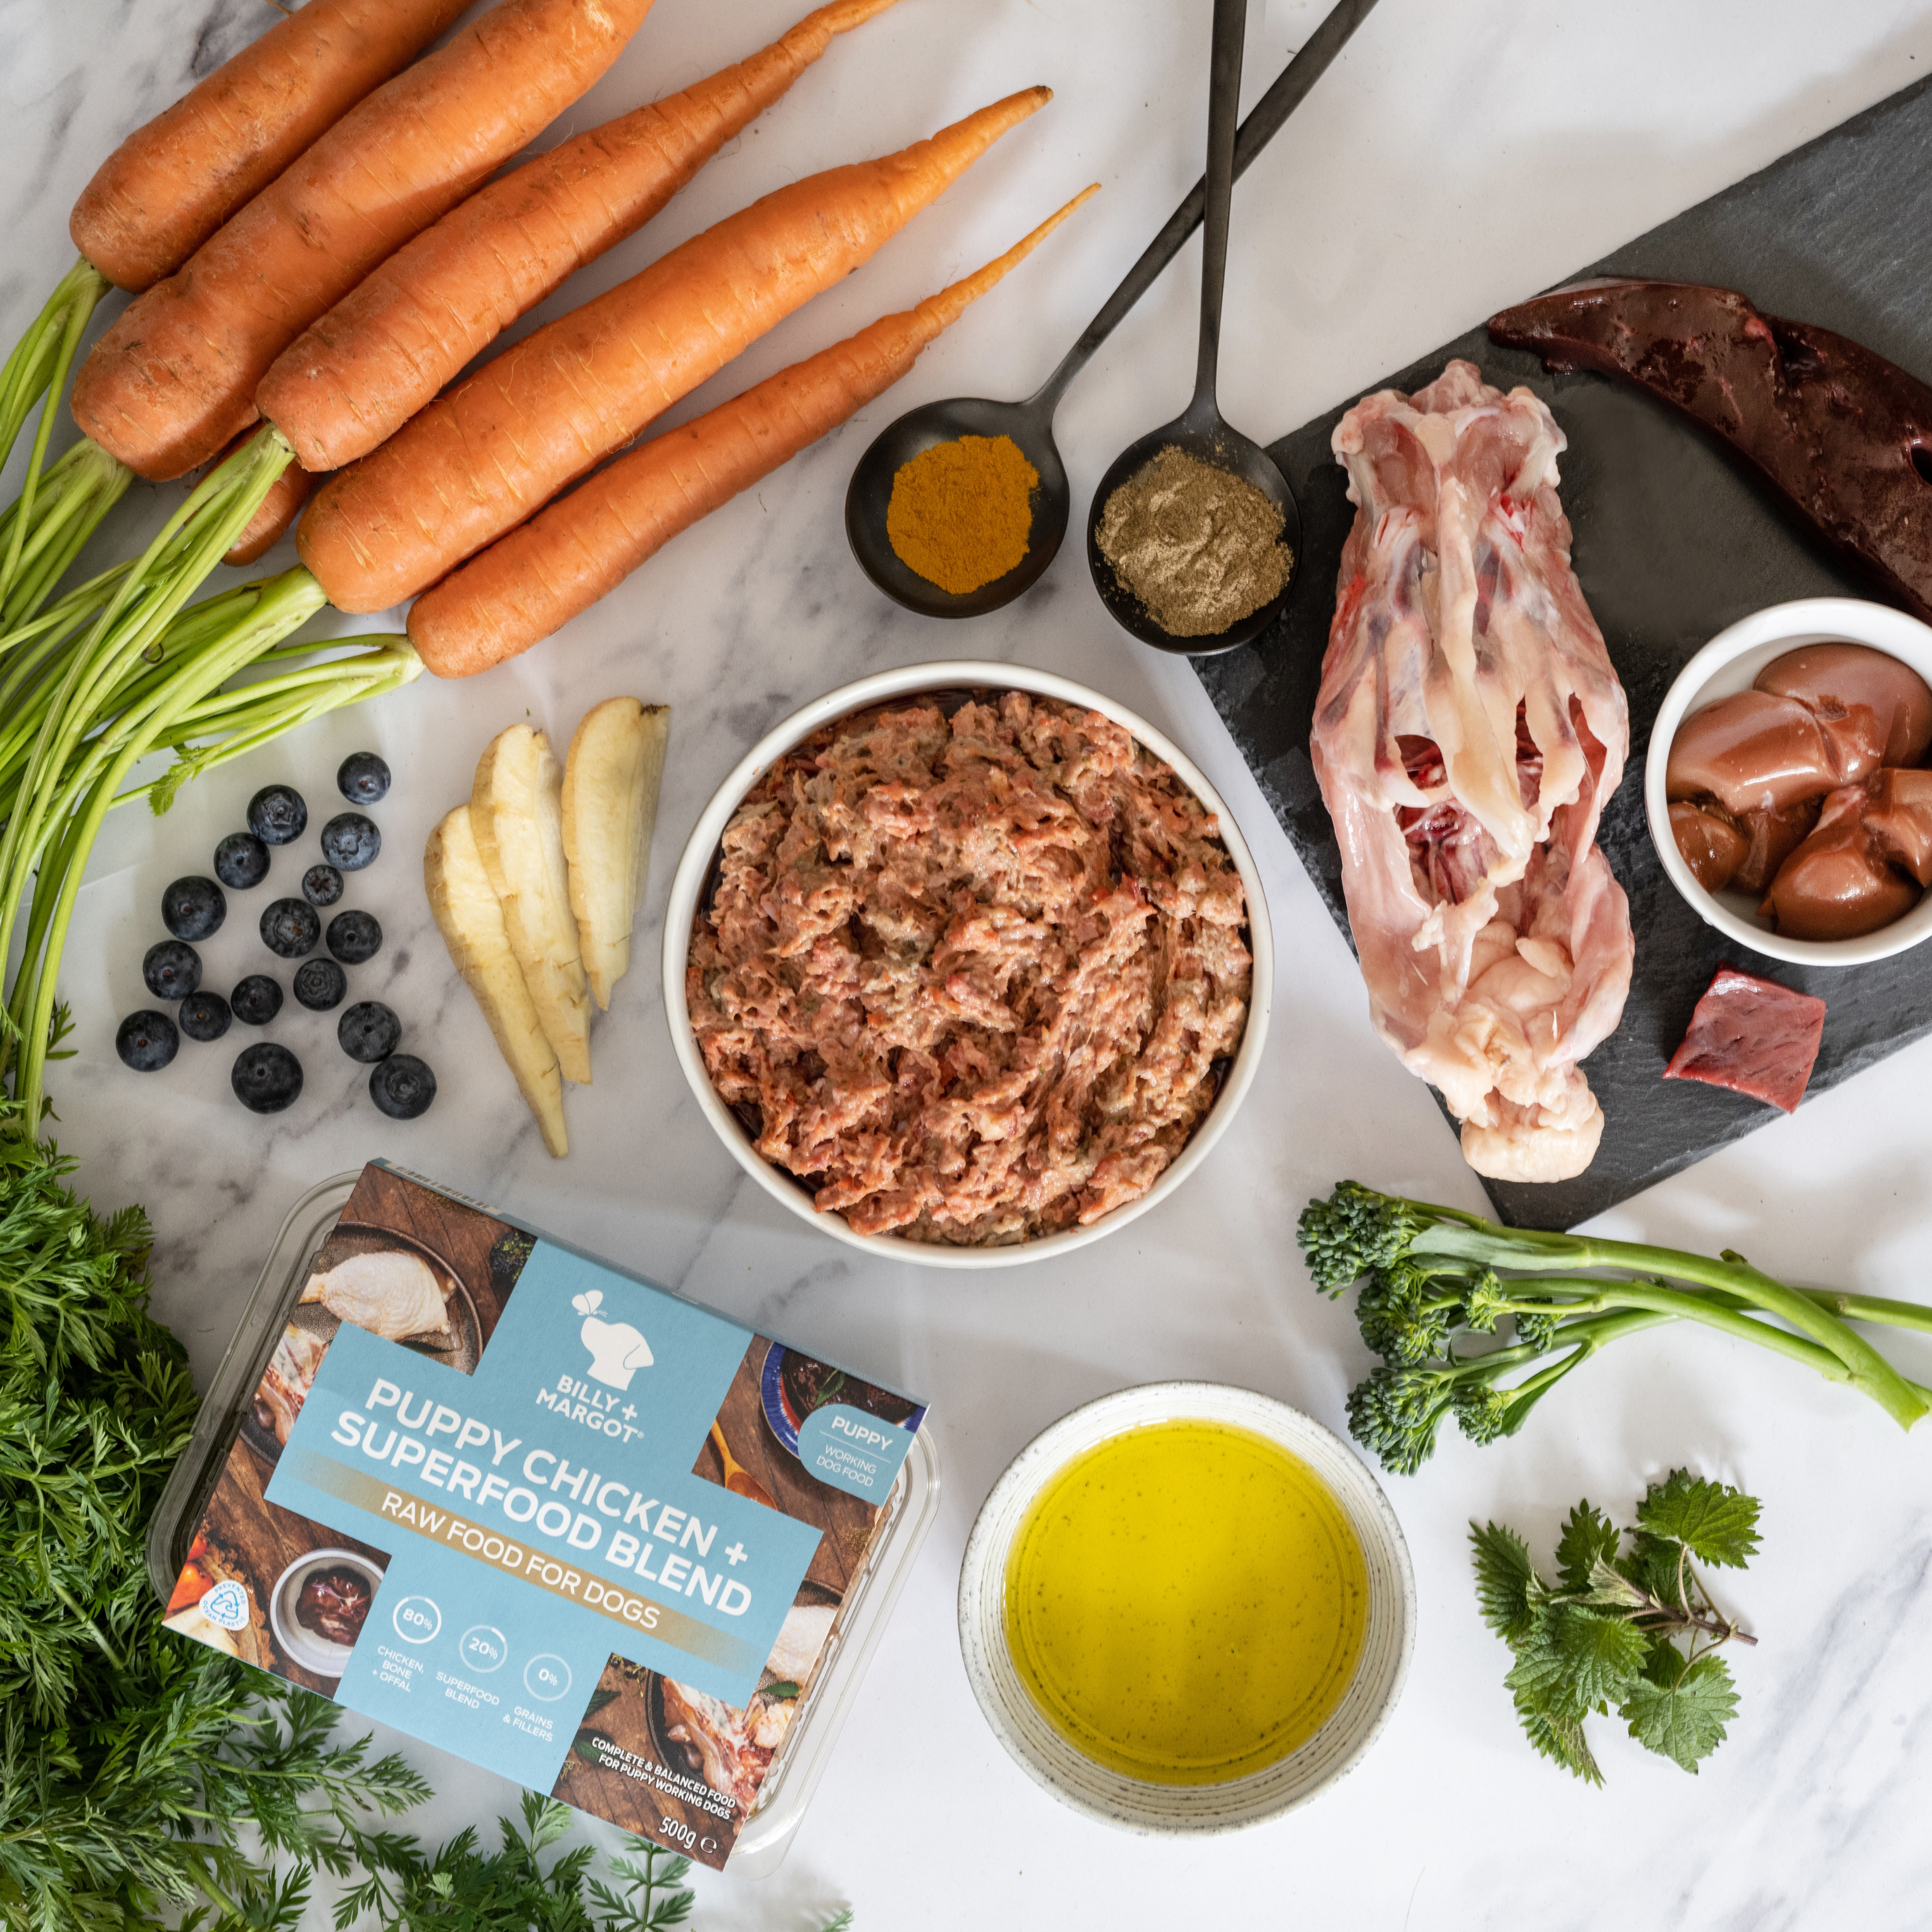 puppy chicken raw dog food ingredients. Made with human-grade chicken, bone, offal, seasonal vegetables and a natural superfood blend. Grain free and nutritionally complete and balanced